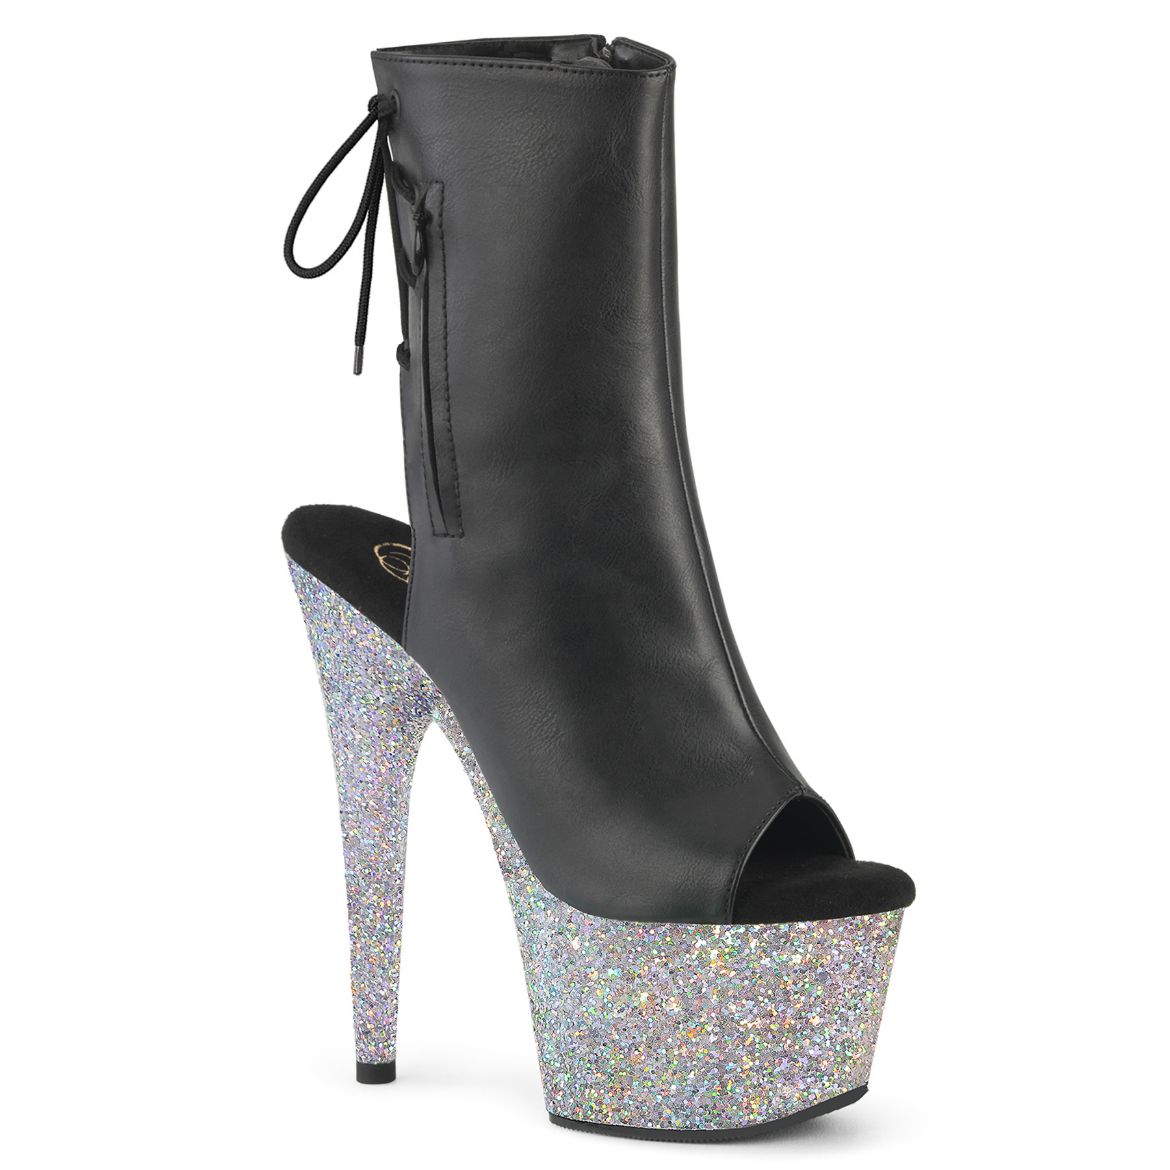 Product image of Pleaser ADORE-1018LG Blk Faux Leather/Slv Multi Glitter 7 Inch Heel 2 3/4 Inch PF Open Toe/Heel Ankle Boot Side Zip